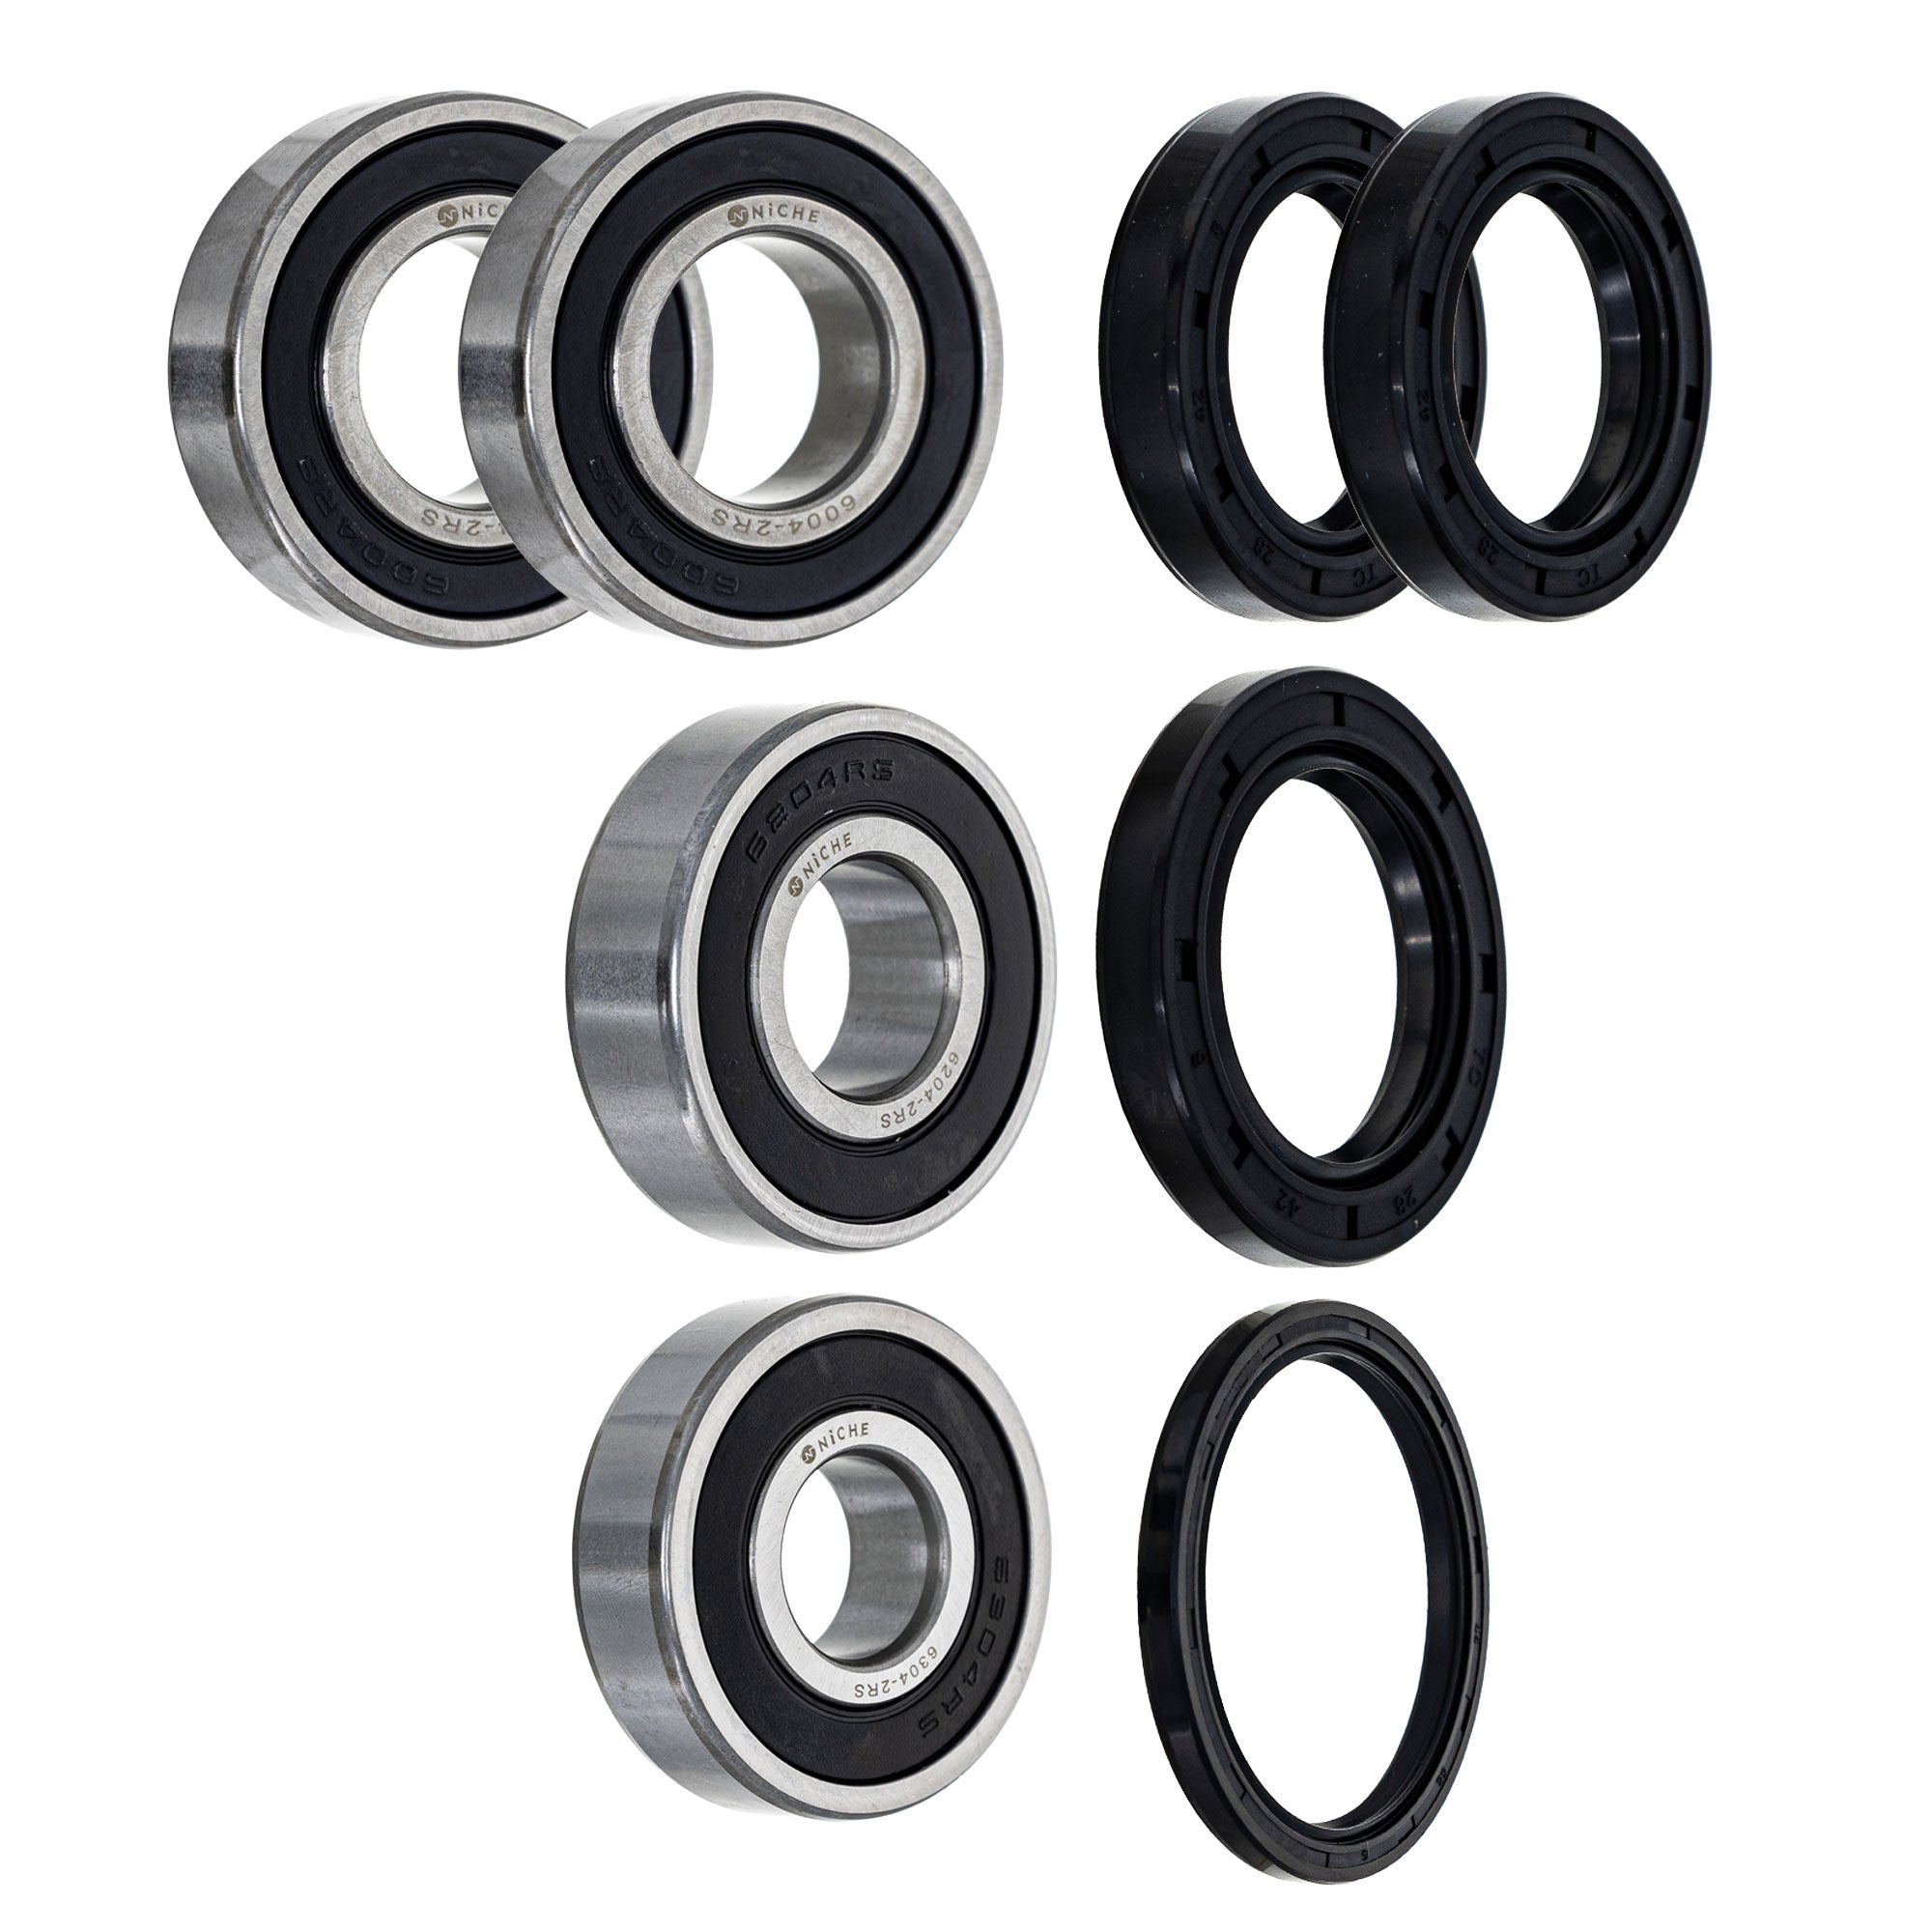 Wheel Bearing Seal Kit for zOTHER Ref No XR650R Super ST1100 Shadow NICHE MK1009265